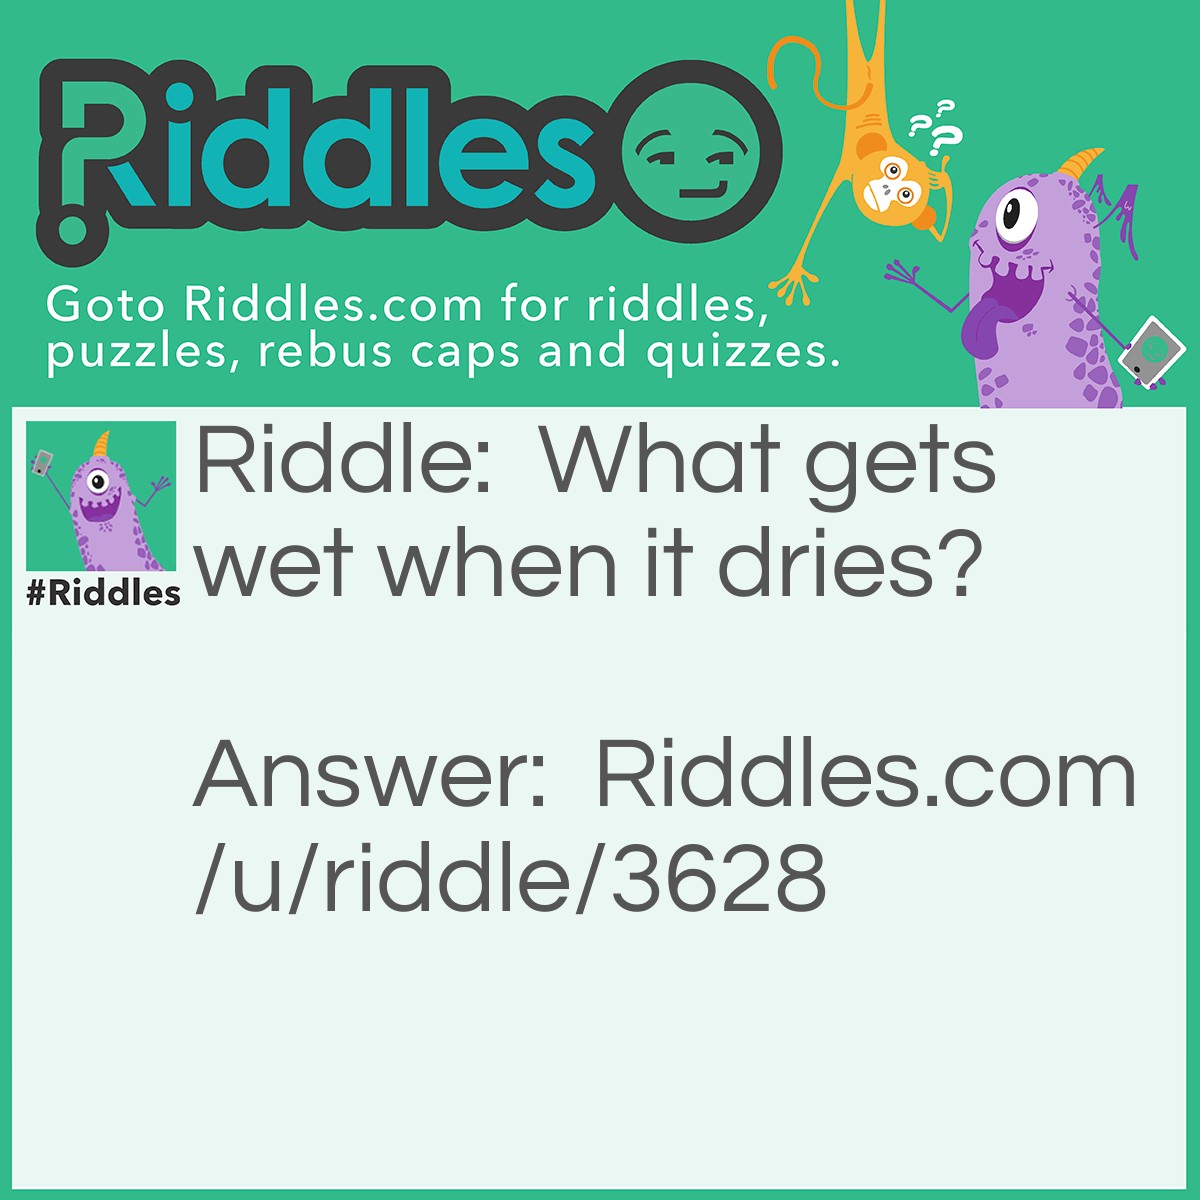 Riddle: What gets wet when it dries? Answer: A towel.